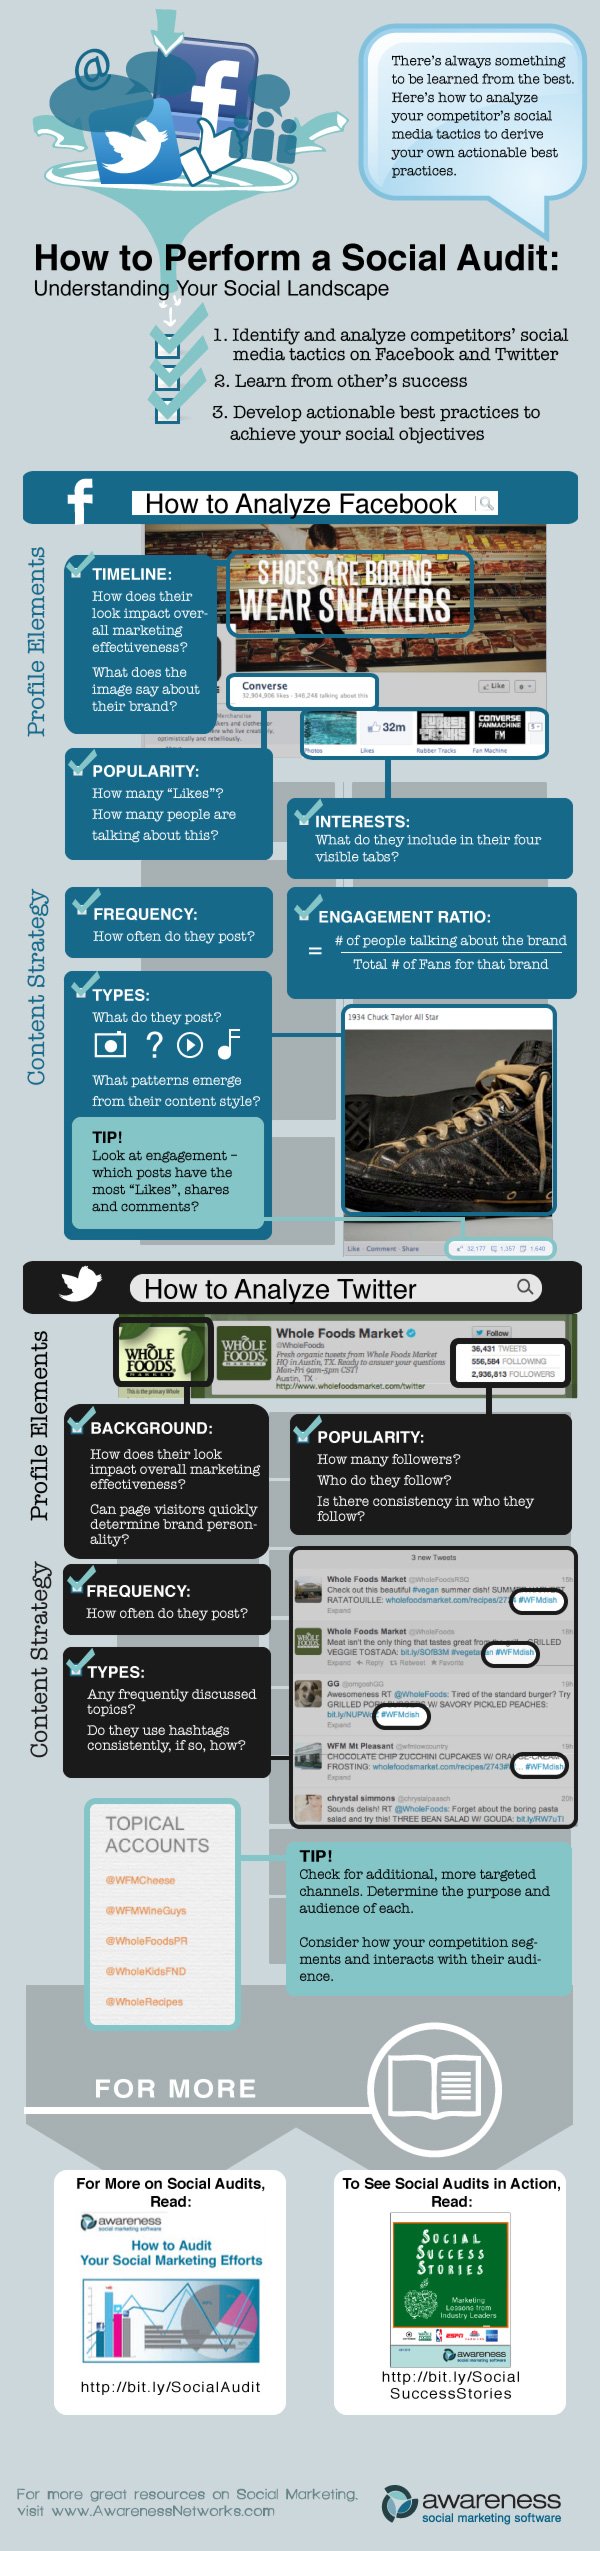 social-audits-infographic-final